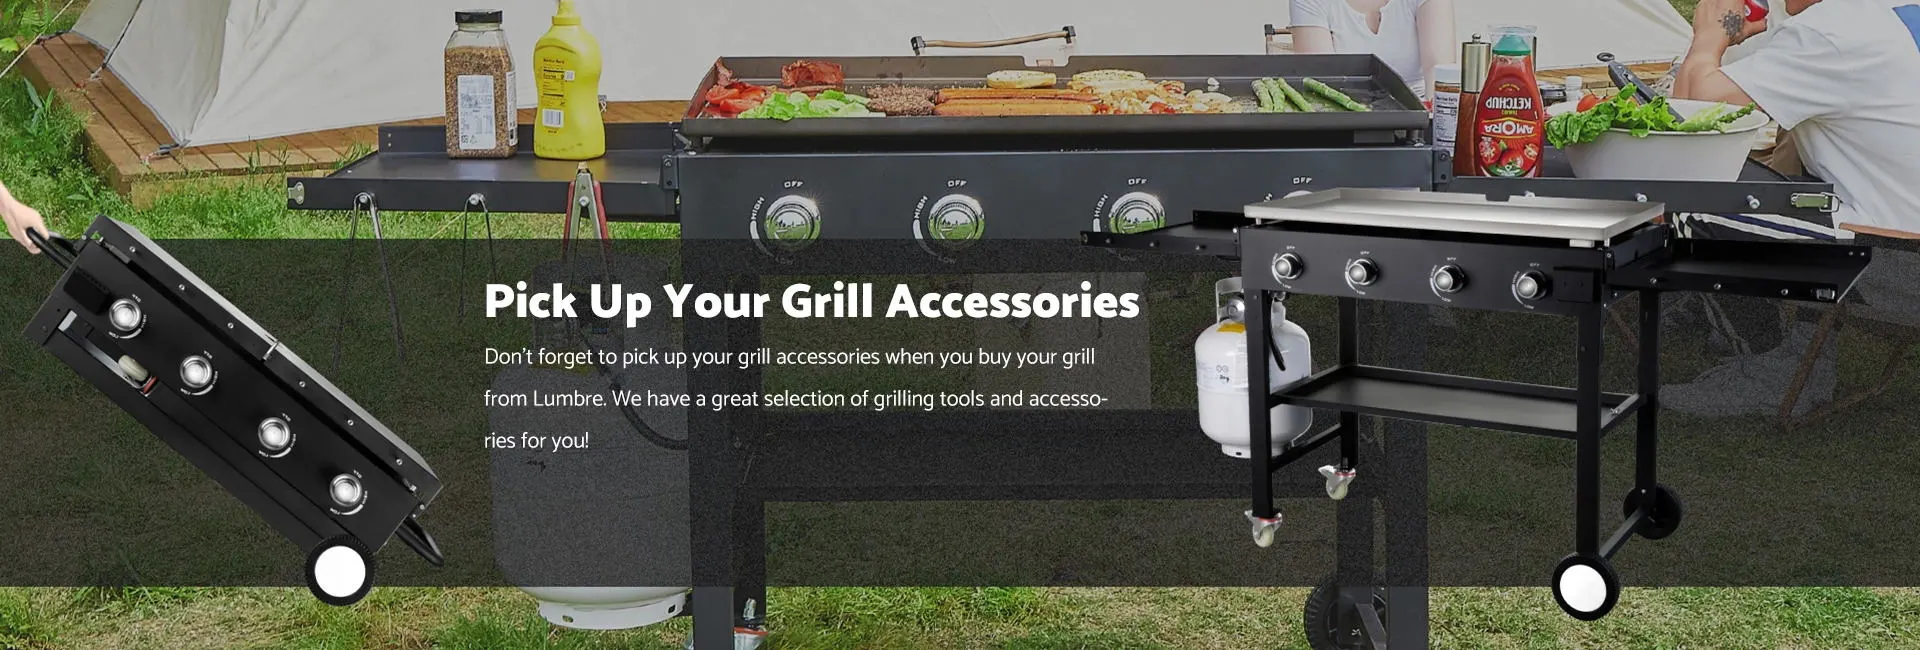 Pick Up Your Grill Accessories